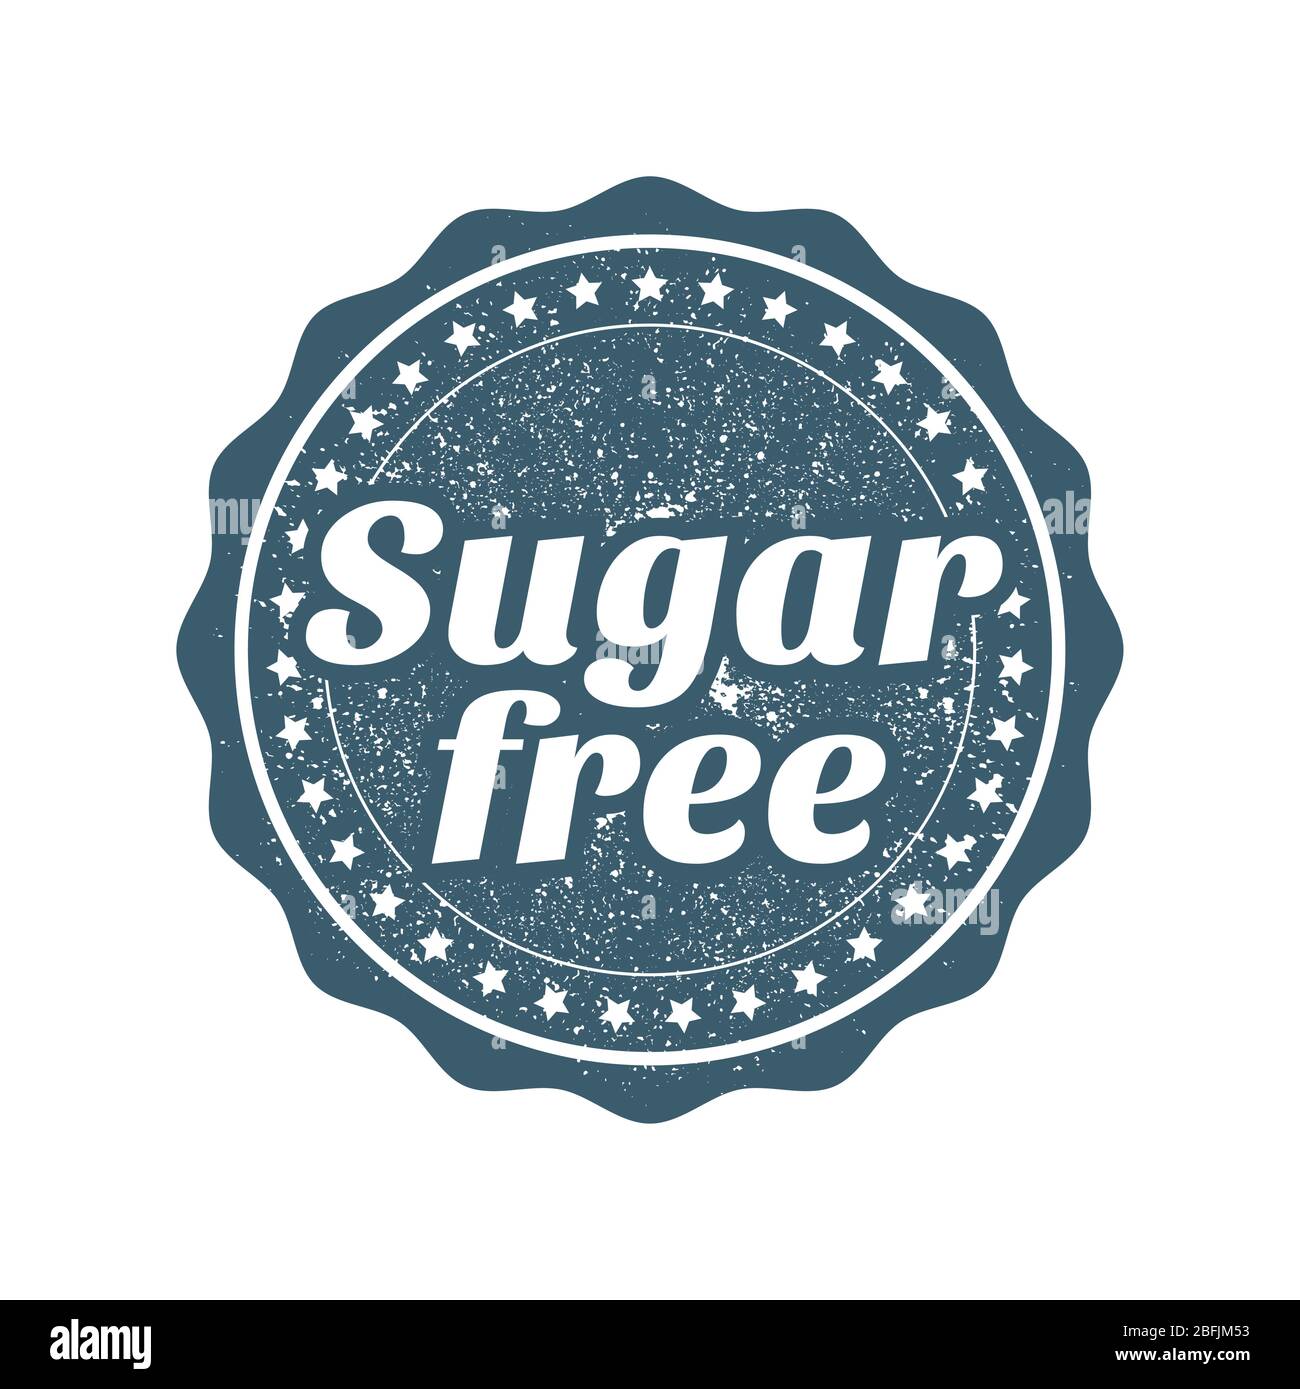 Sugar free stamp, webseal or badge for products without sugar Stock Vector